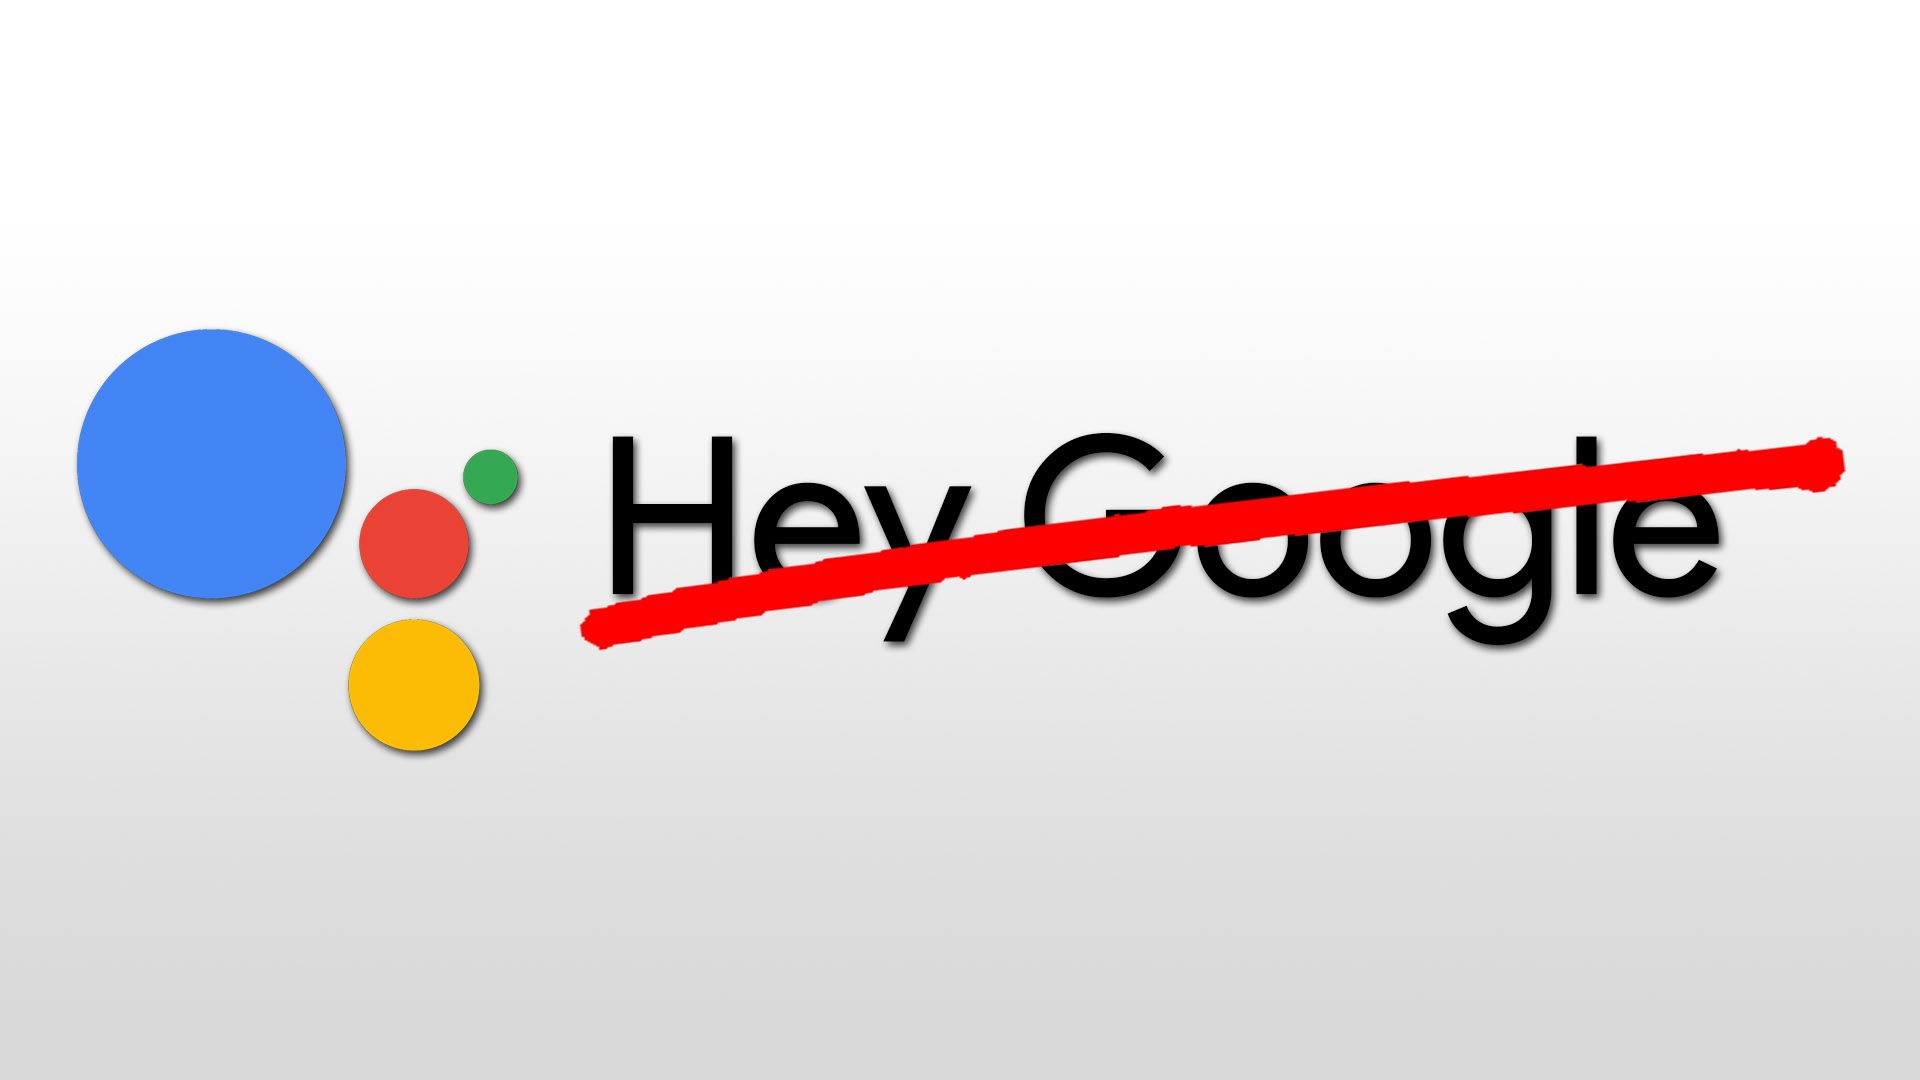 Google gets closer to dropping 'Hey Google' for some Assistant tasks